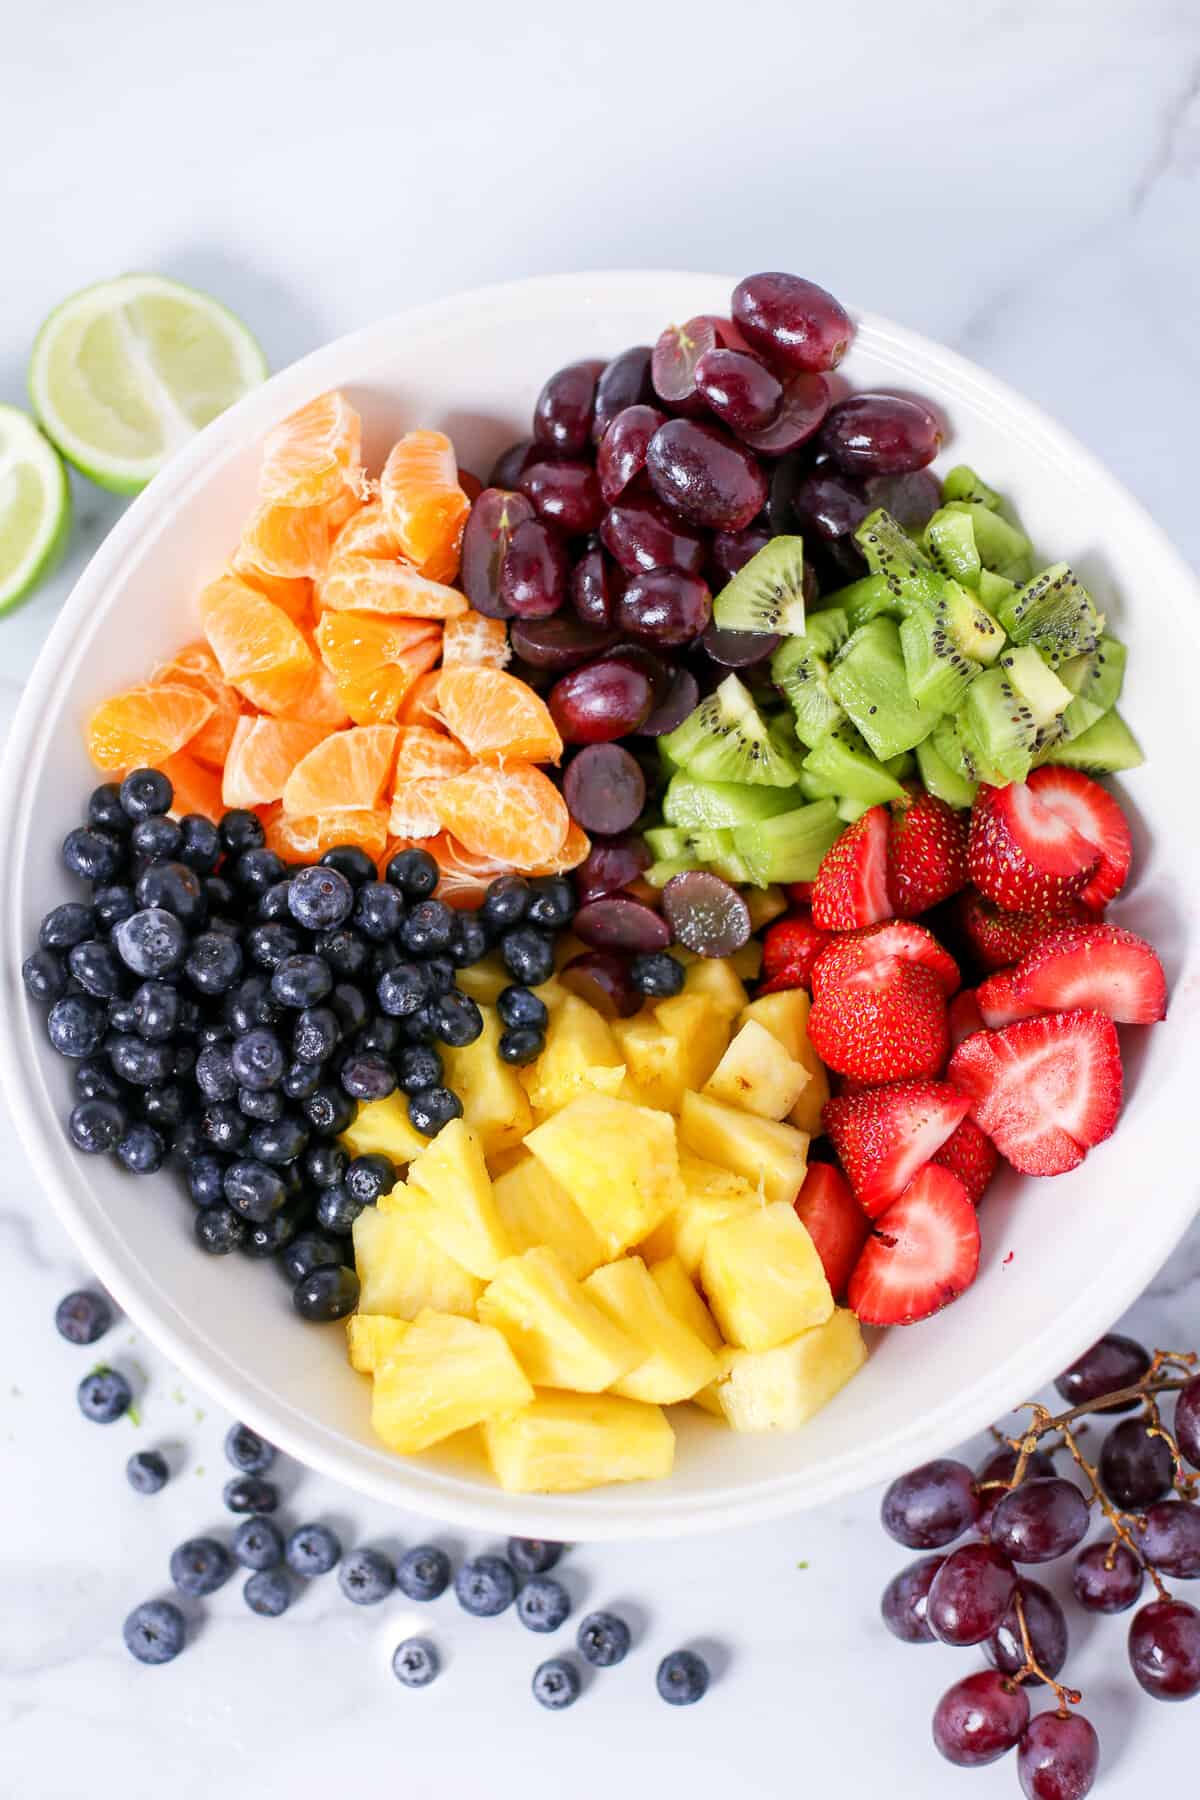 Chopped fruit grouped together in a white bowl.